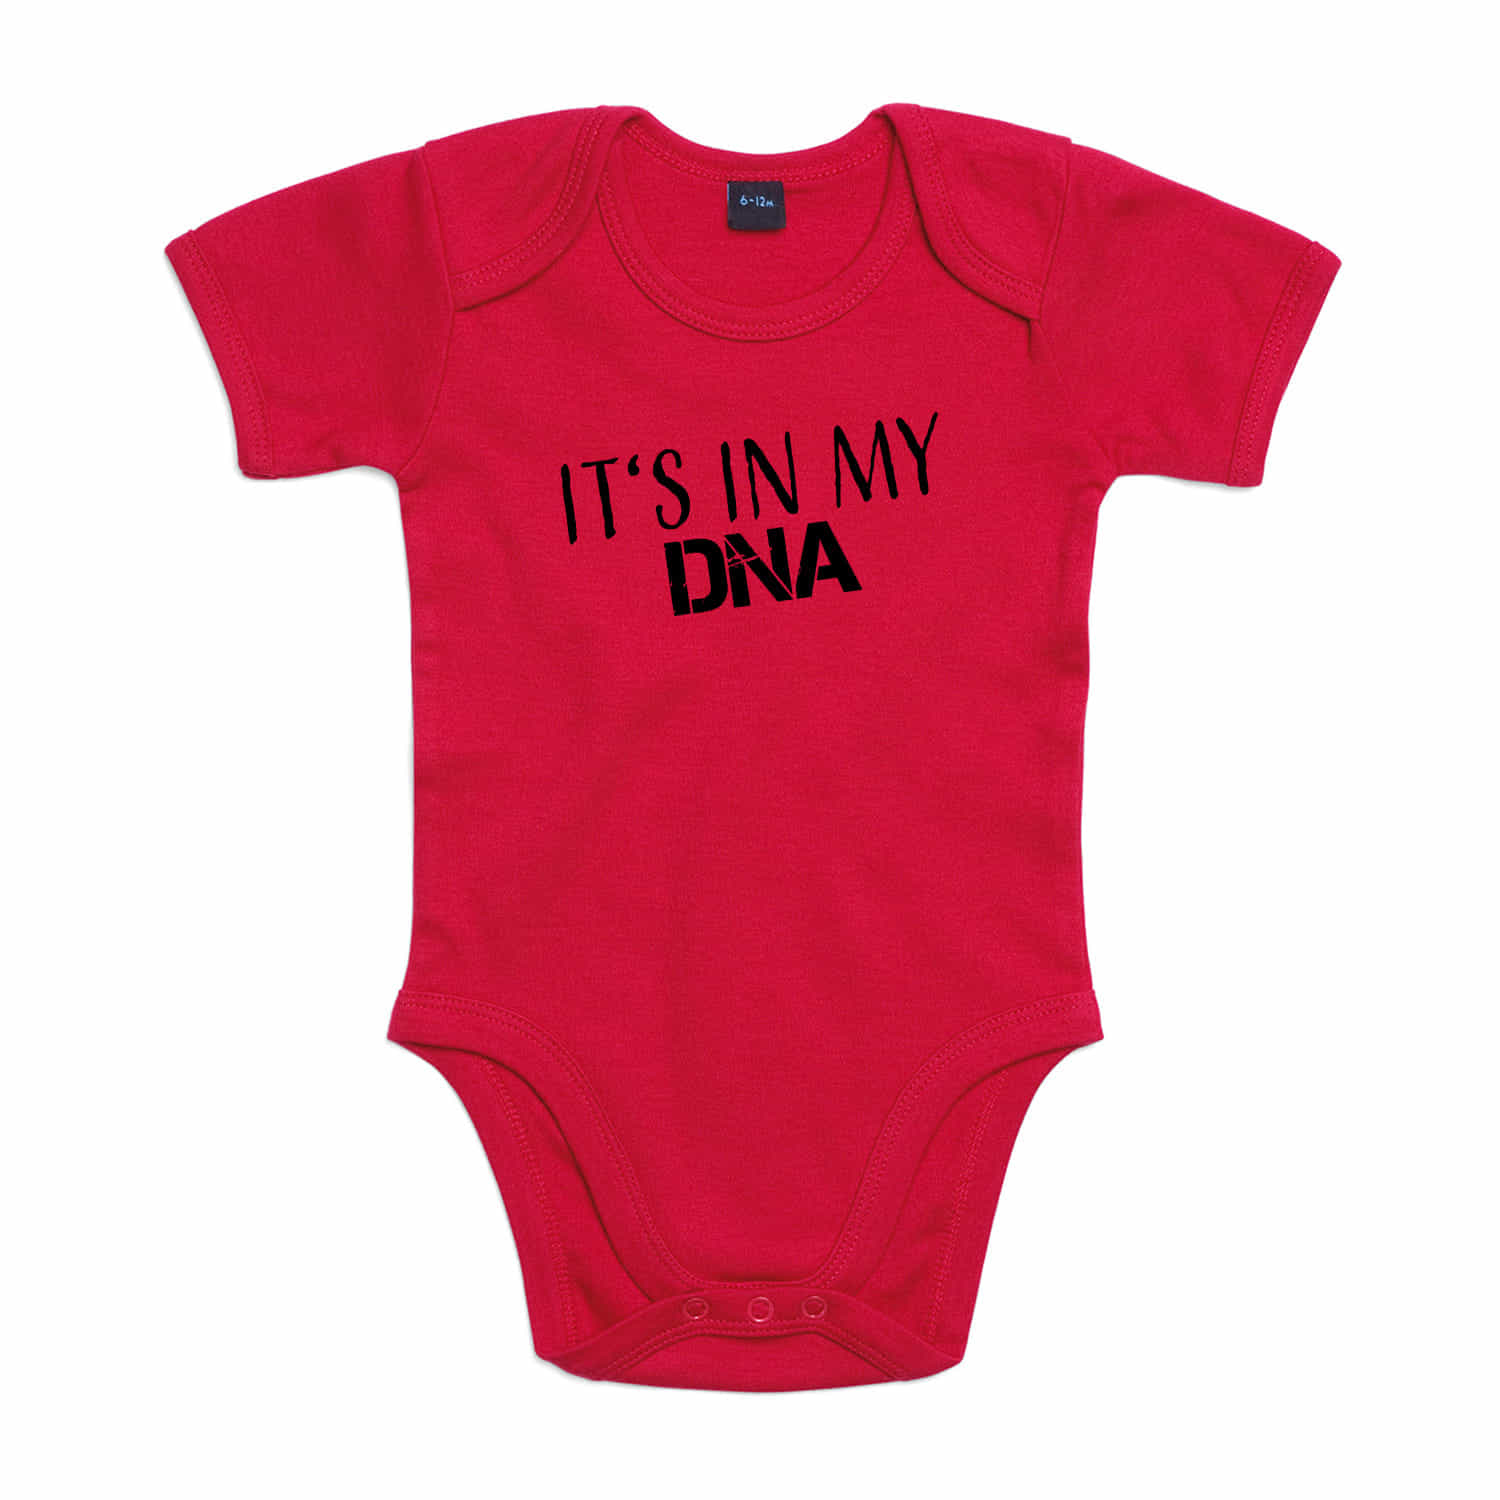 Baby-Body "It's in my DNA"